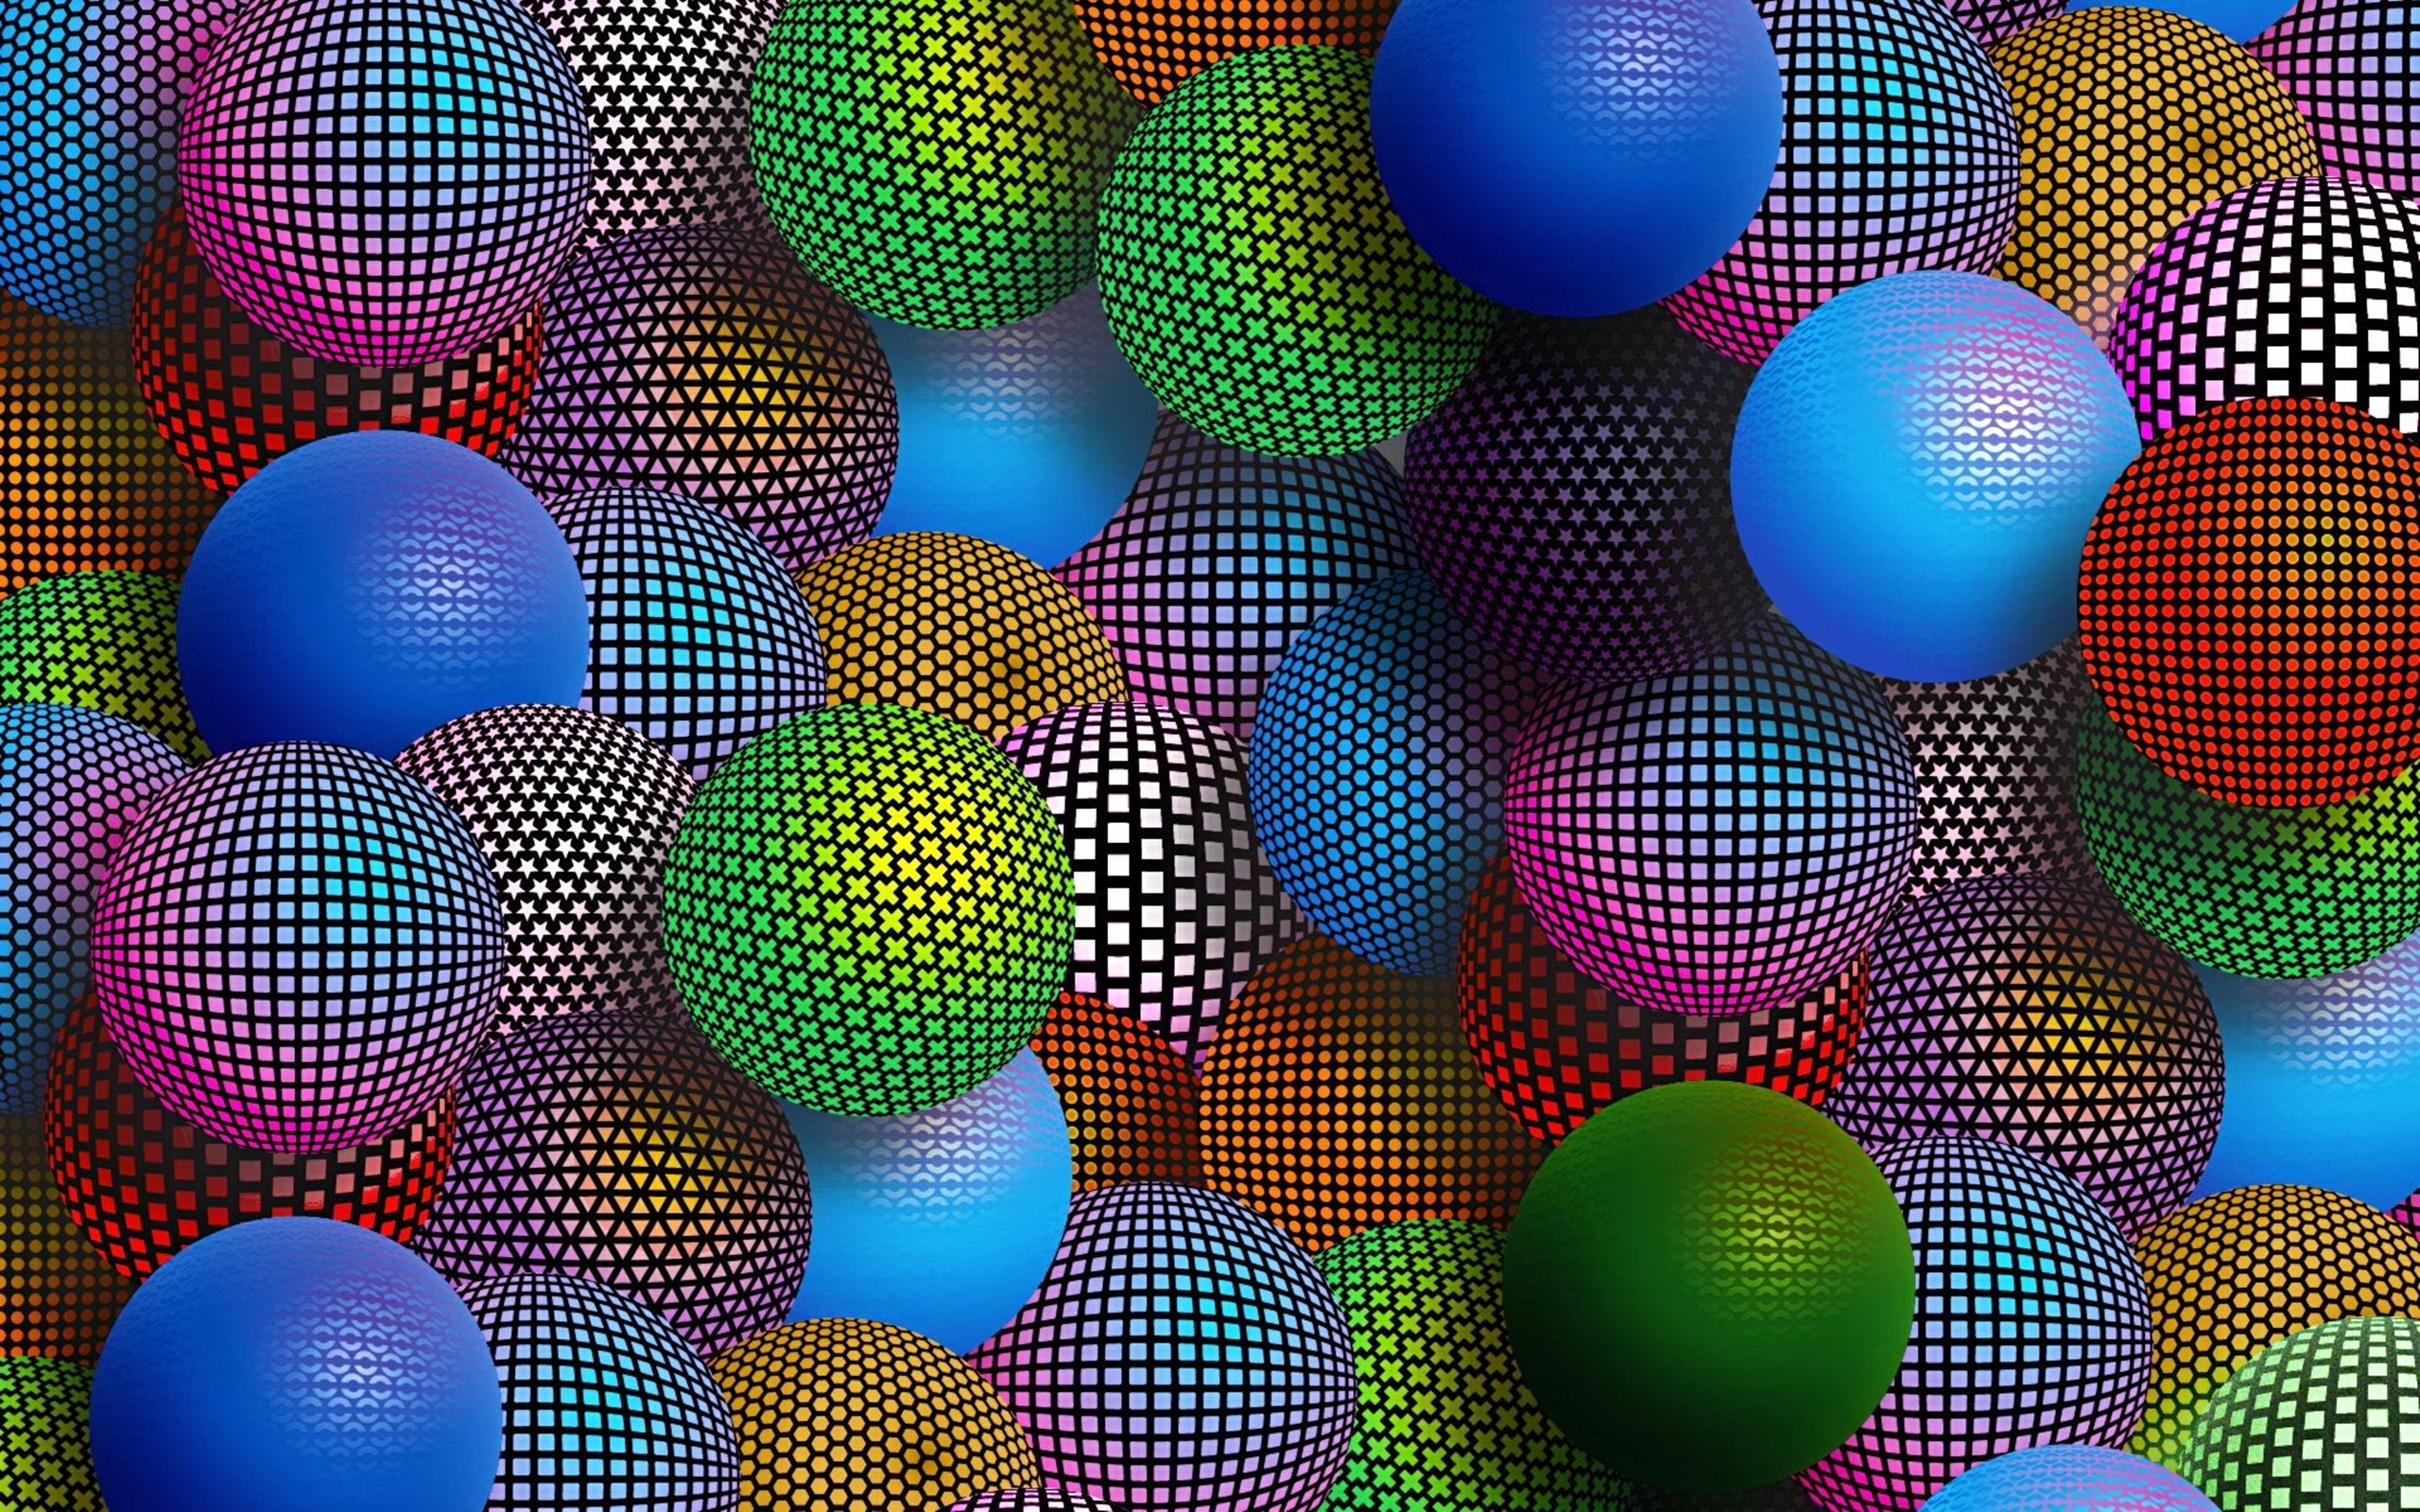 Multicolored Patterned Spheres 3d Wallpaper 2560x1600 ...